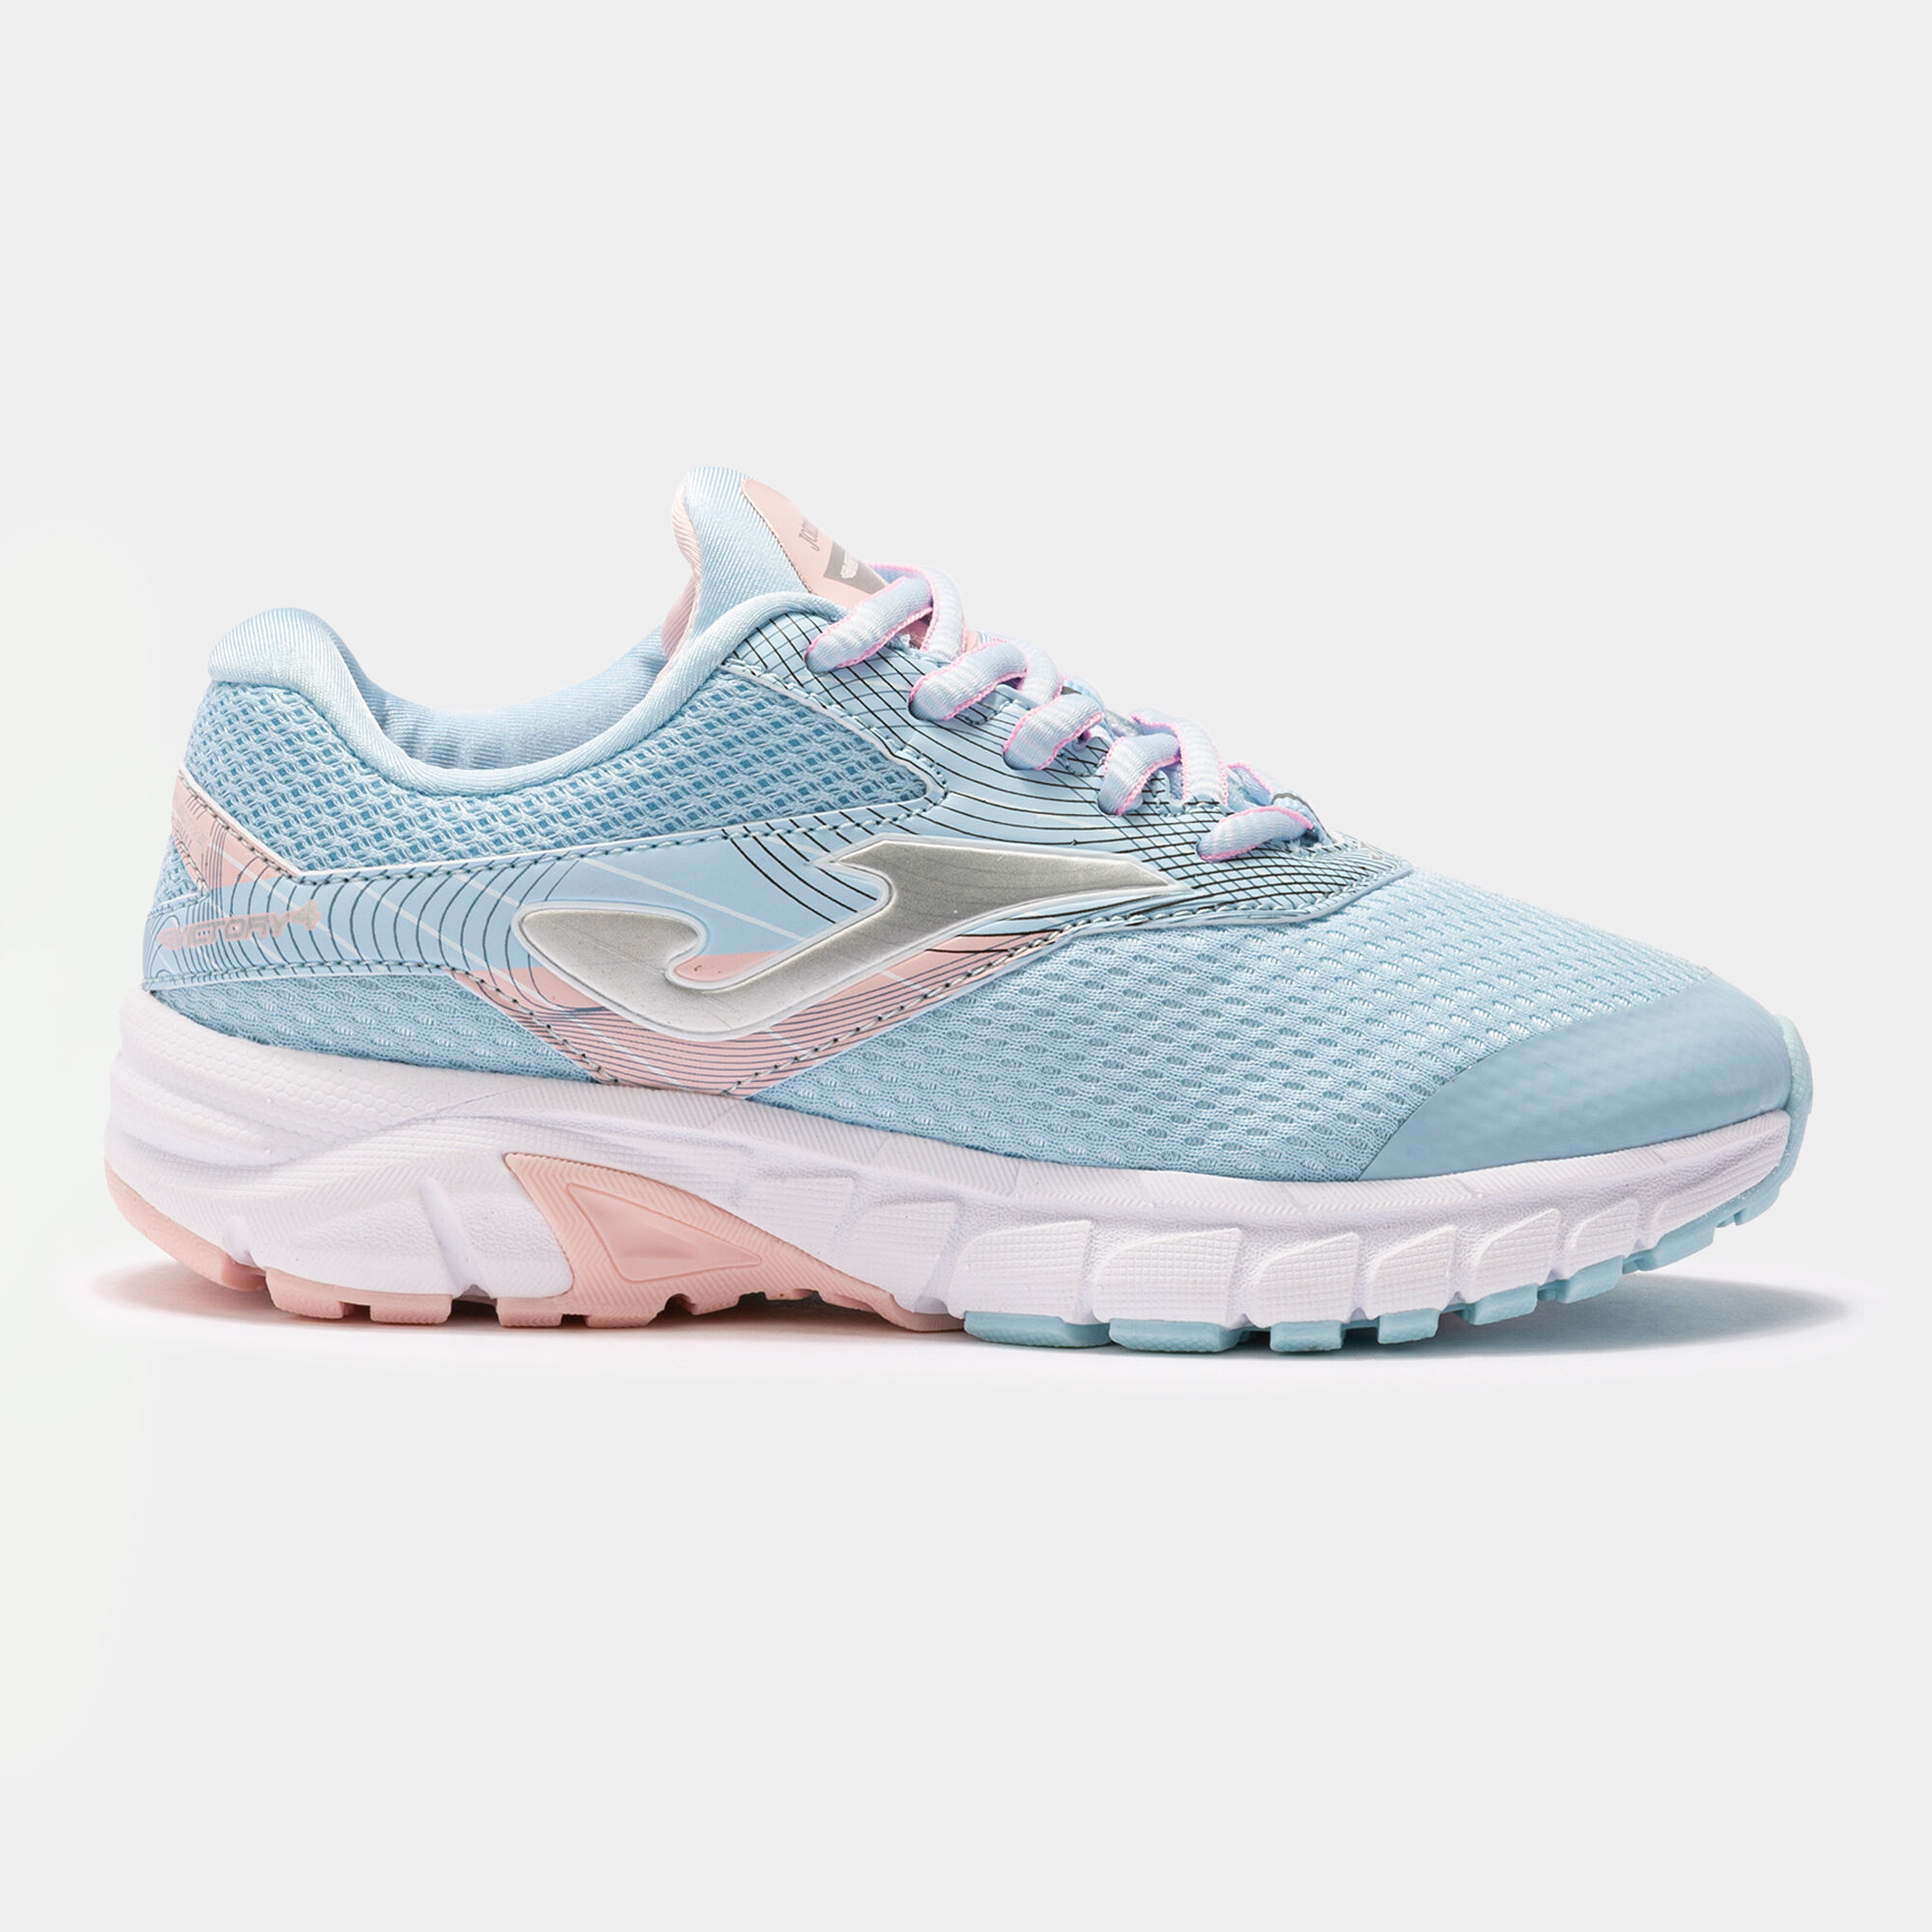 RUNNING SHOES VICTORY 22 JUNIOR SKY BLUE PINK